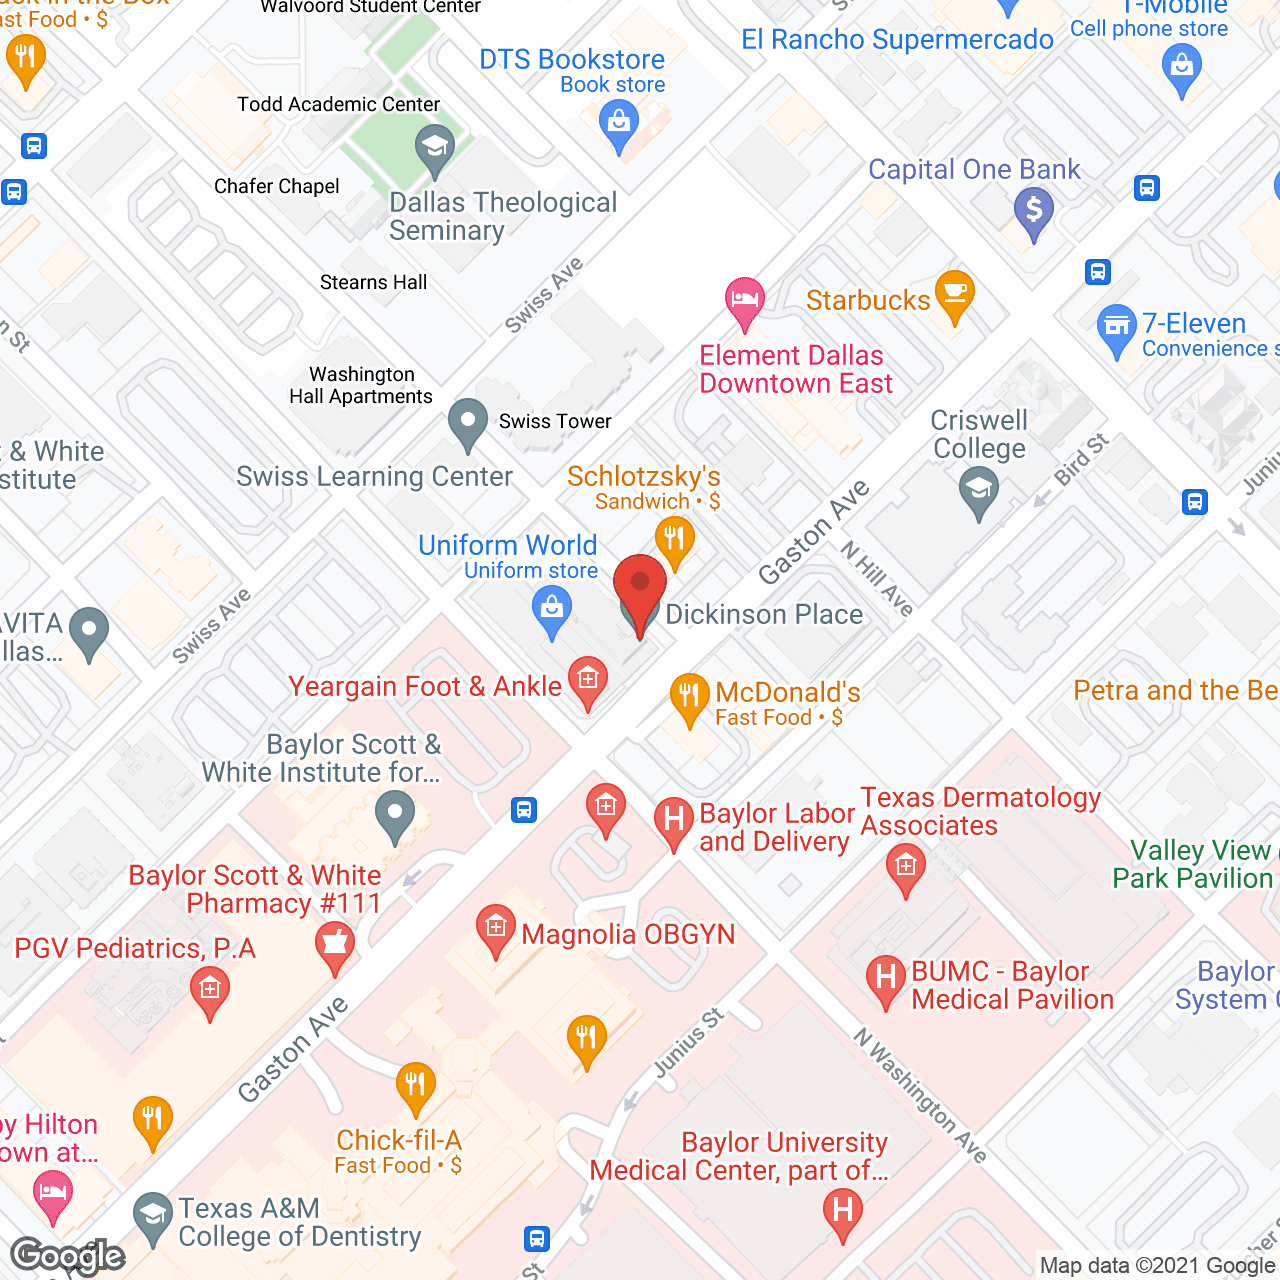 Dickinson Place in google map